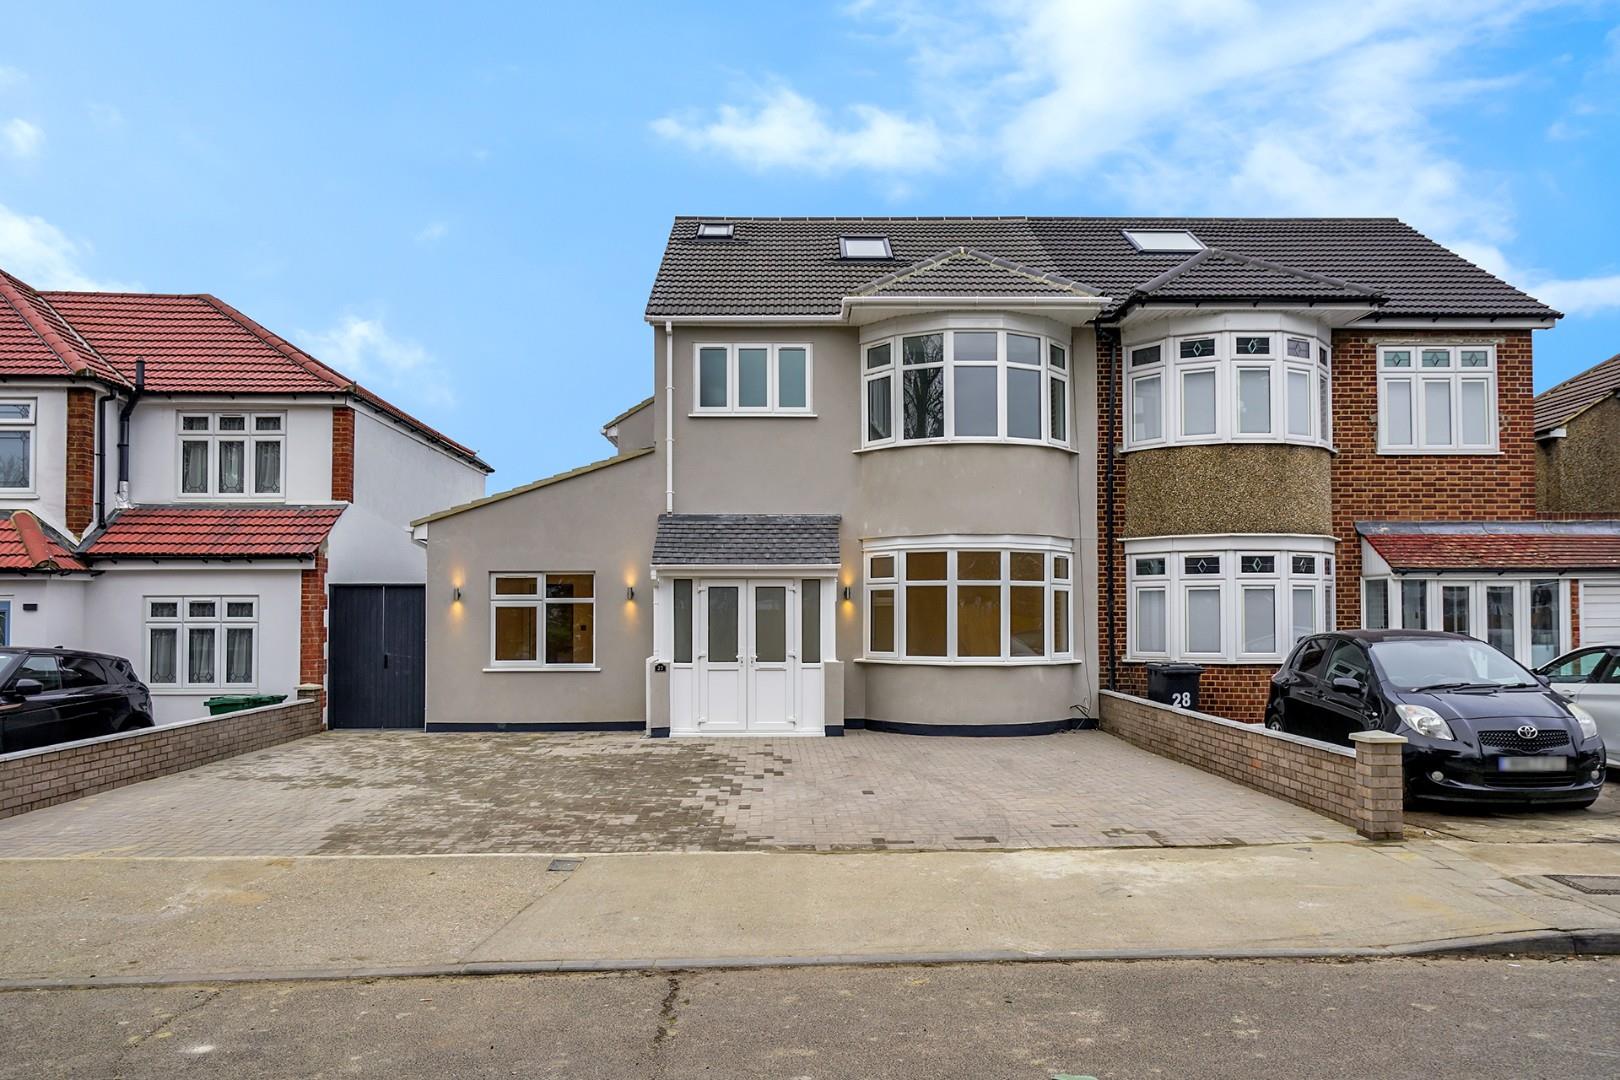 5 bed semi-detached house for sale in Pettits Boulevard, Romford - Property Image 1